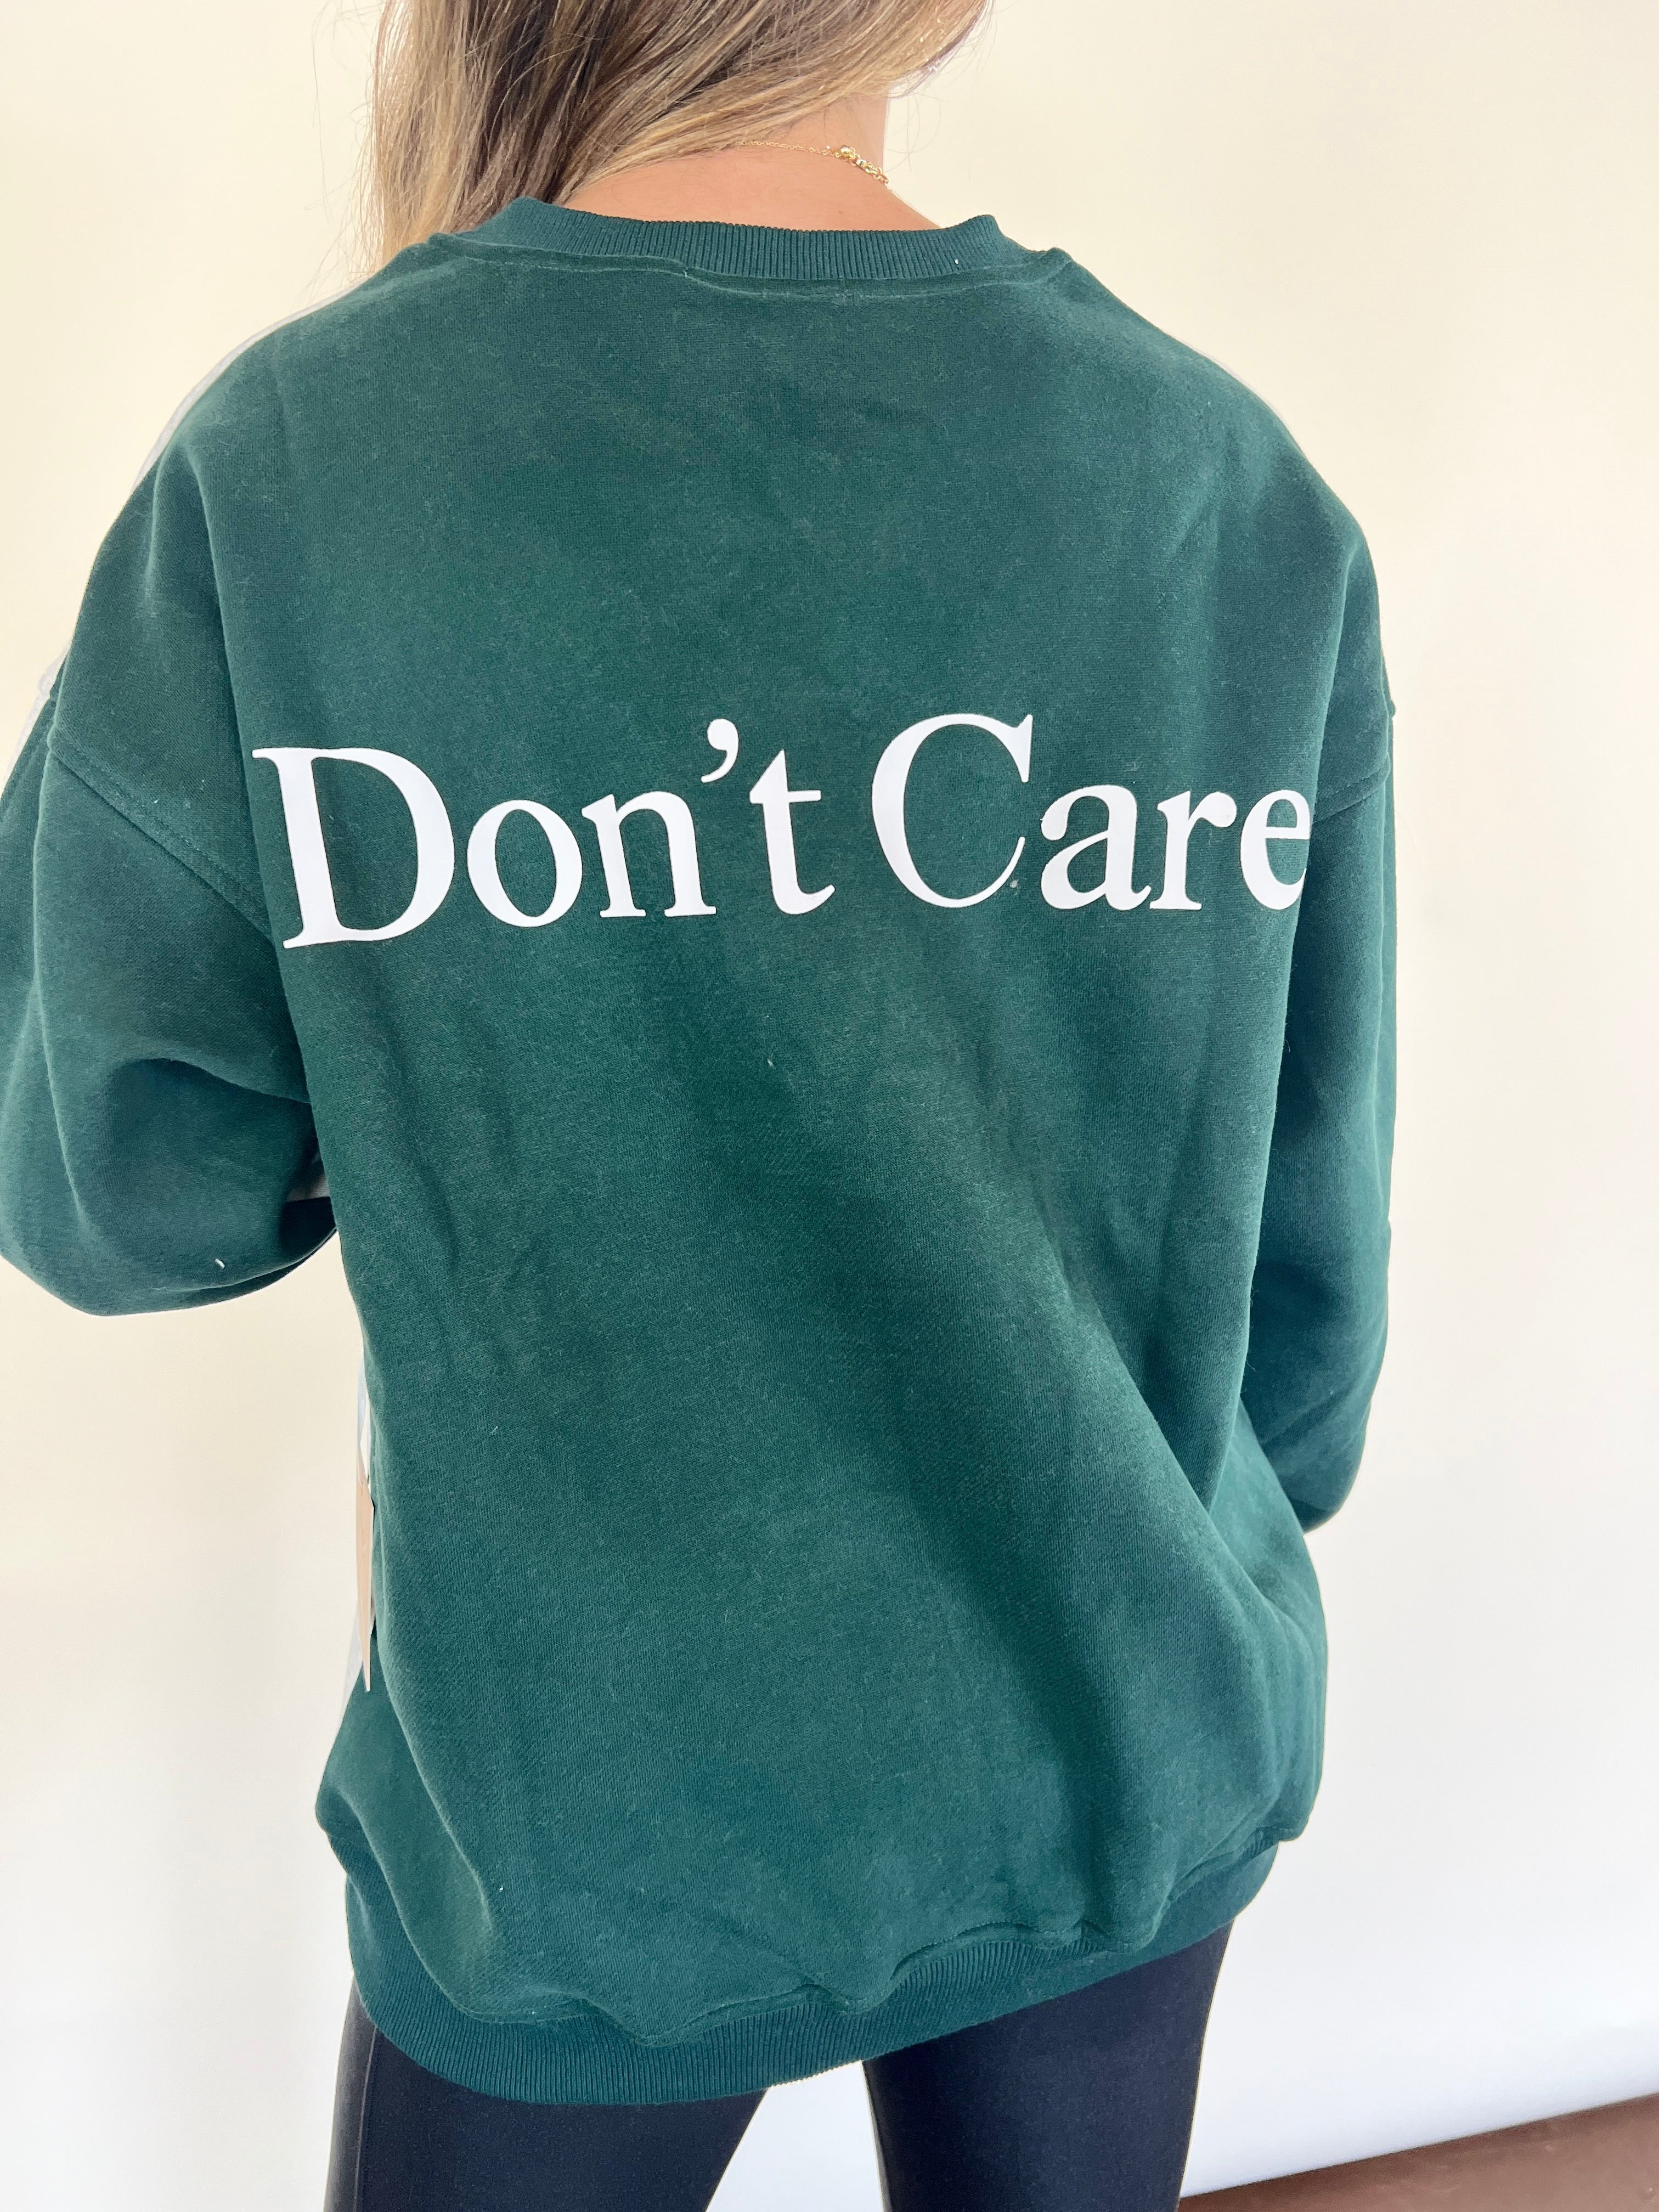 Don't Know, Don't Care sweatshirt